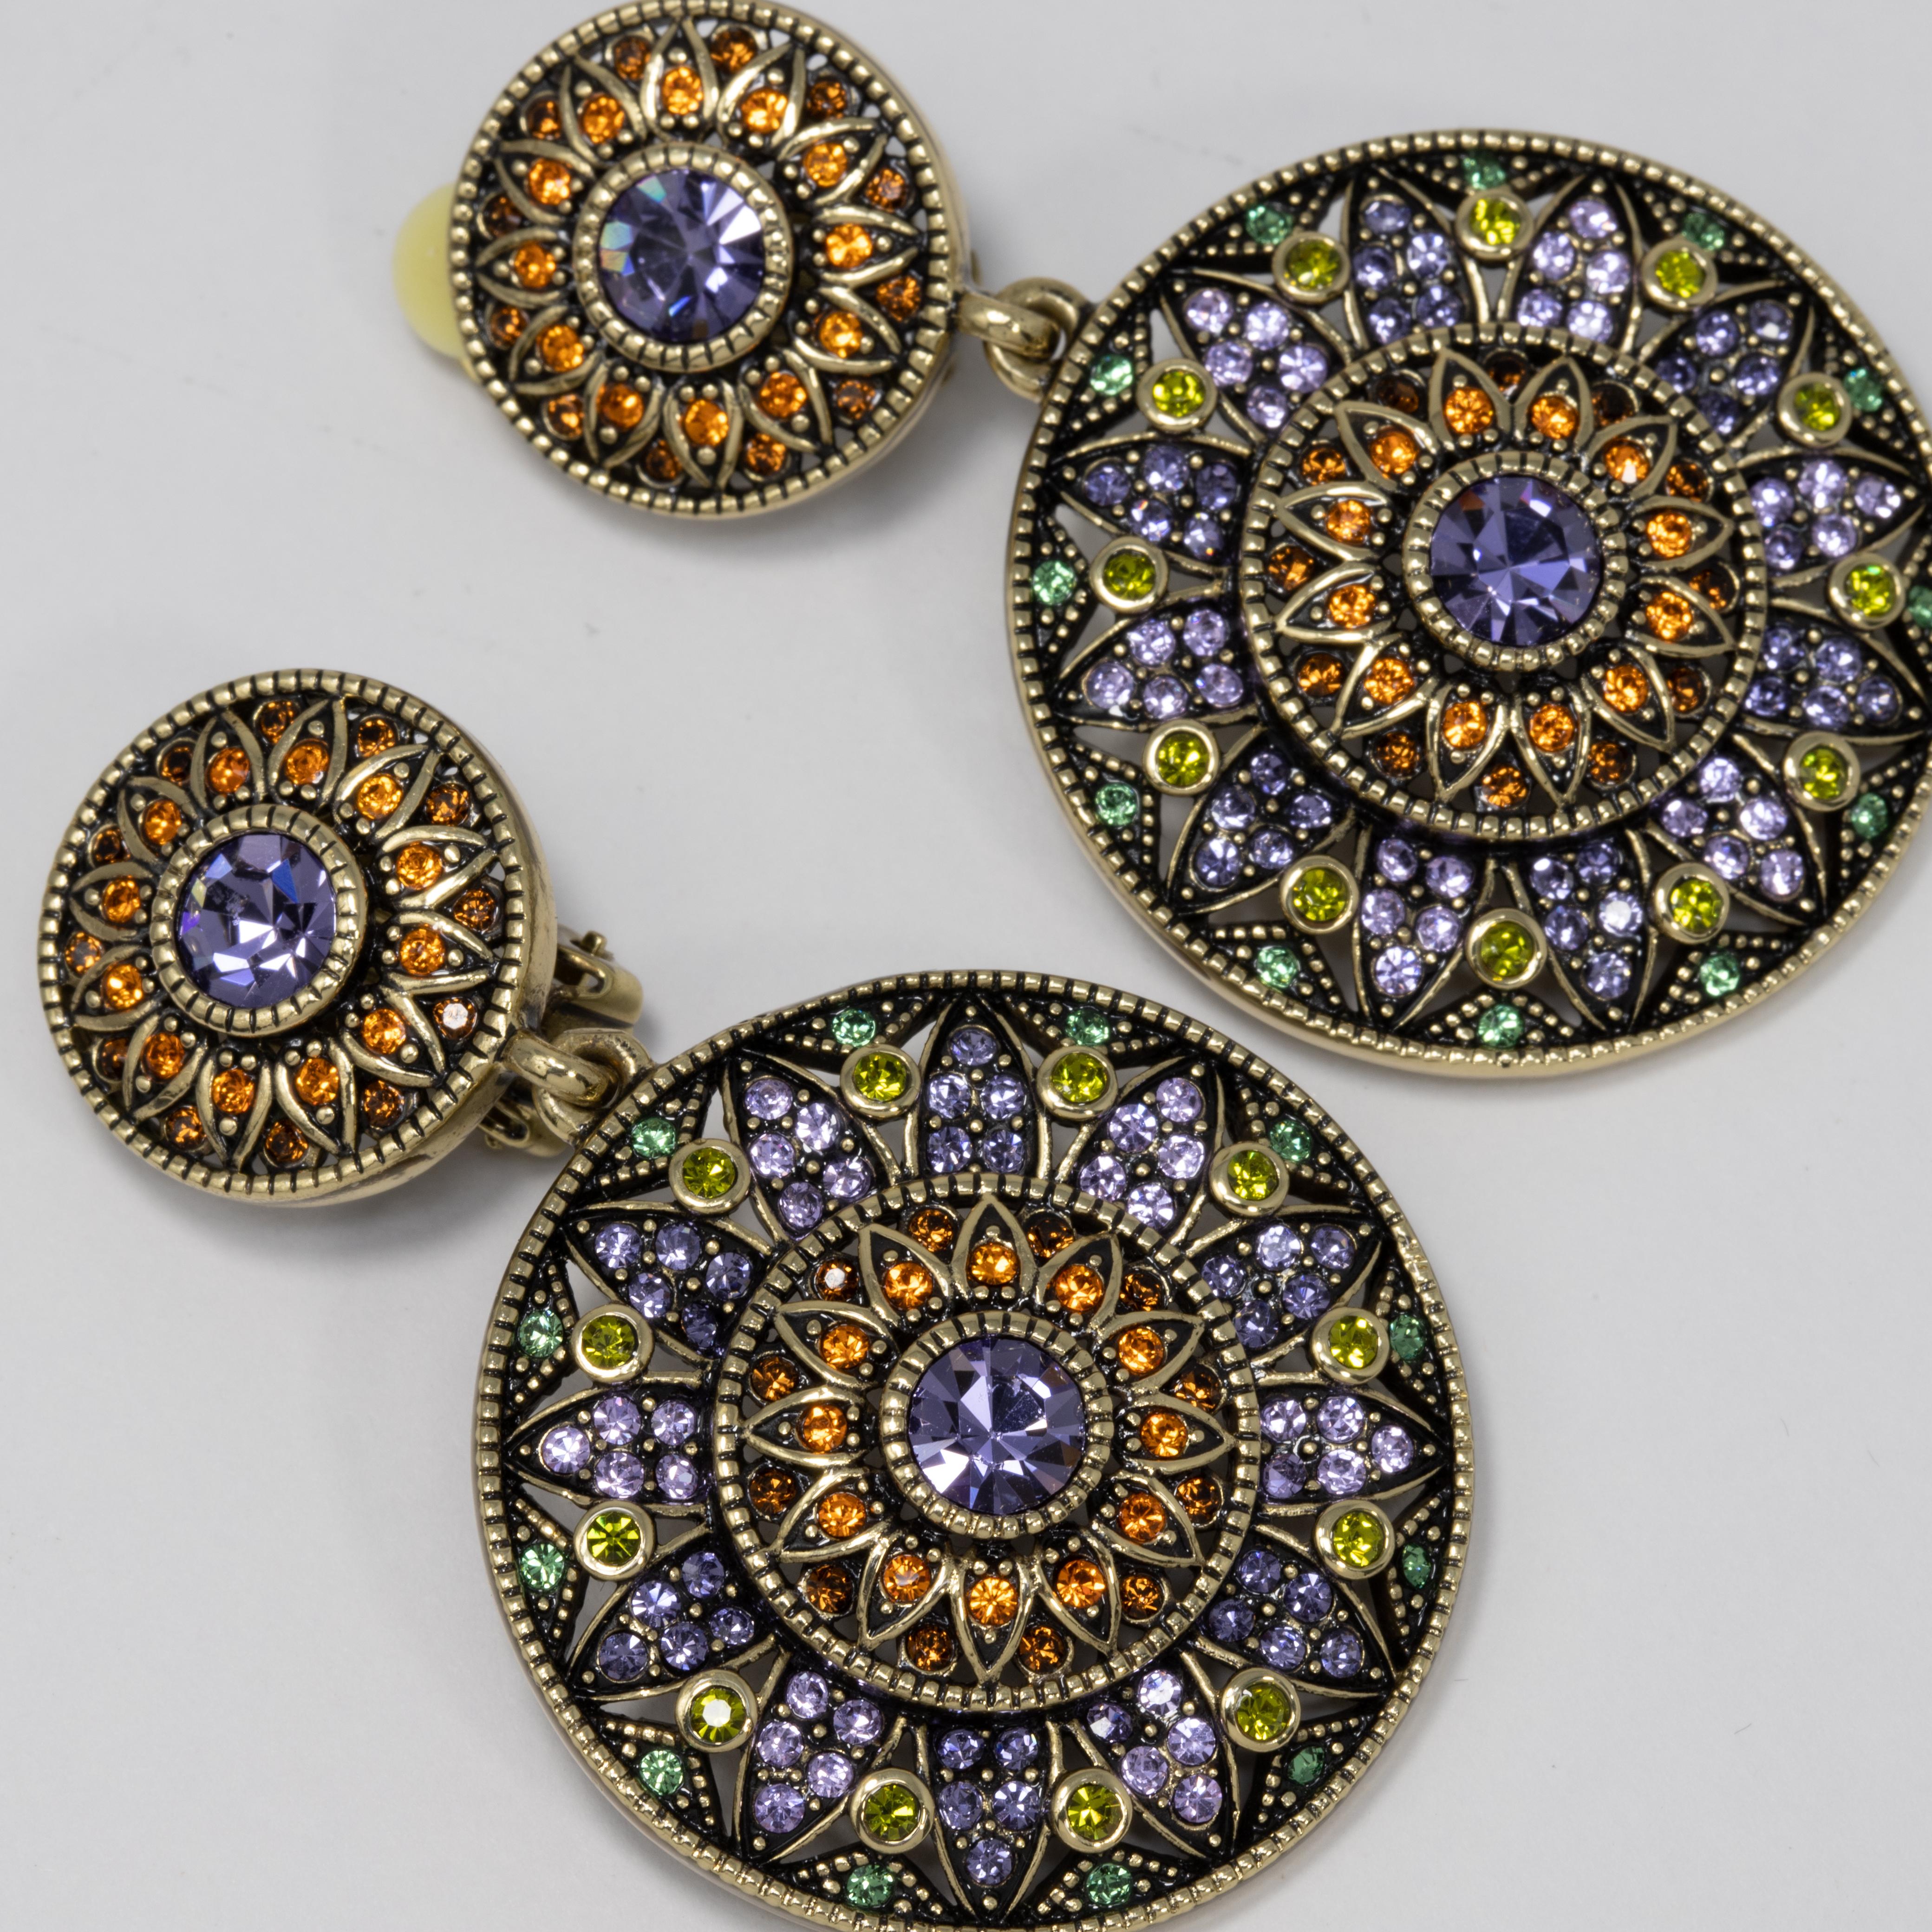 Heidi Daus ornate dangling clip on earrings. Feature two circular dangling flower motifs decorated with amethyst, citrine, and olive crystals.

Hallmarks: Heidi Daus, China

